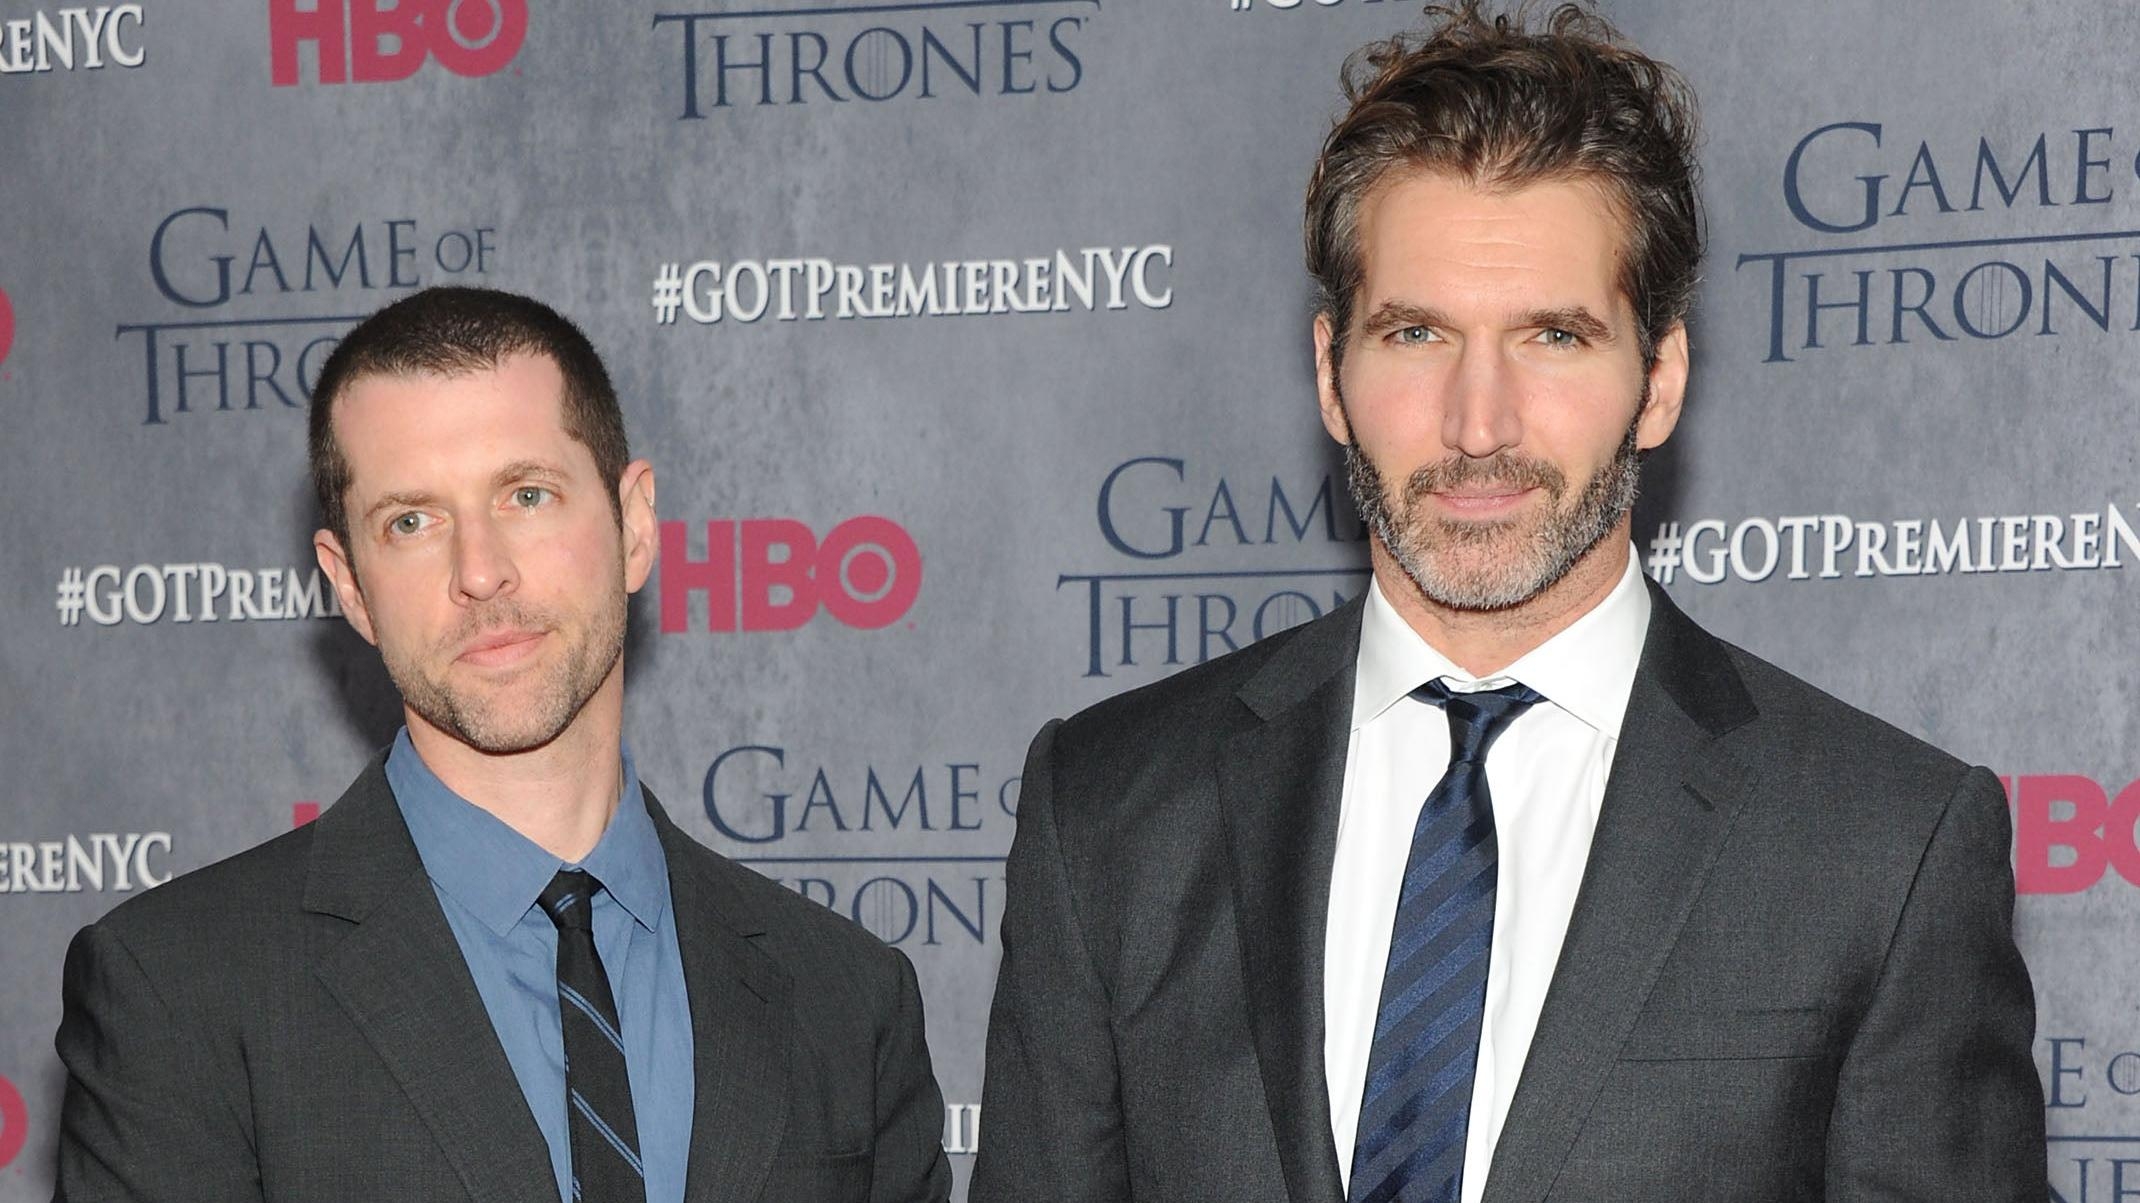 Game Of Thrones co-creators D.B. Weiss and David Benioff confirm they’re not involved in the spin-offs